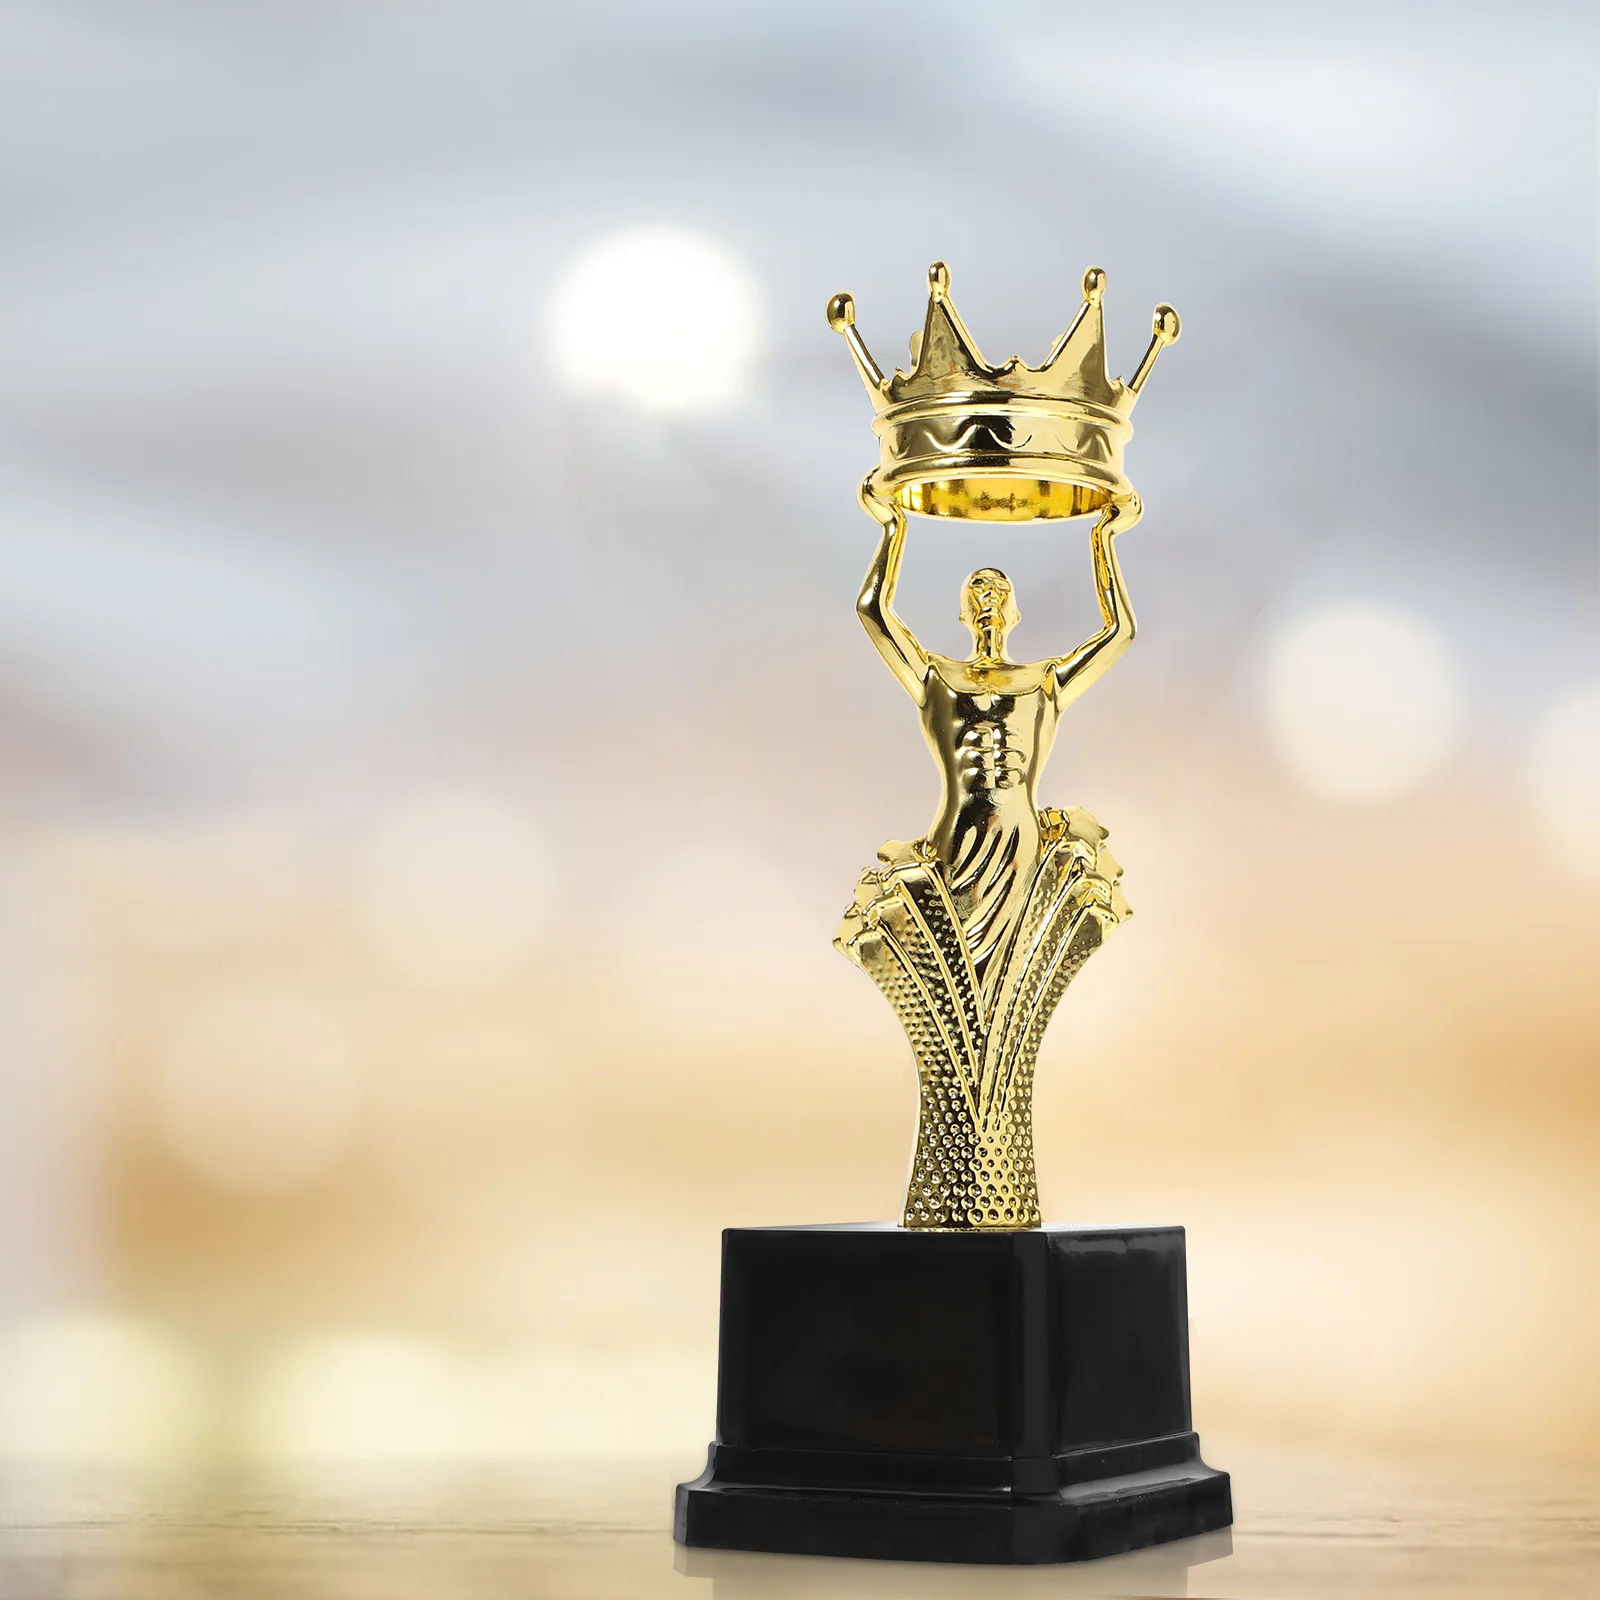 

Award Championship Cup Exquisite Plastic Figure Statue Trophy The Prize for Tournaments Competitions Best Gift Home Decor